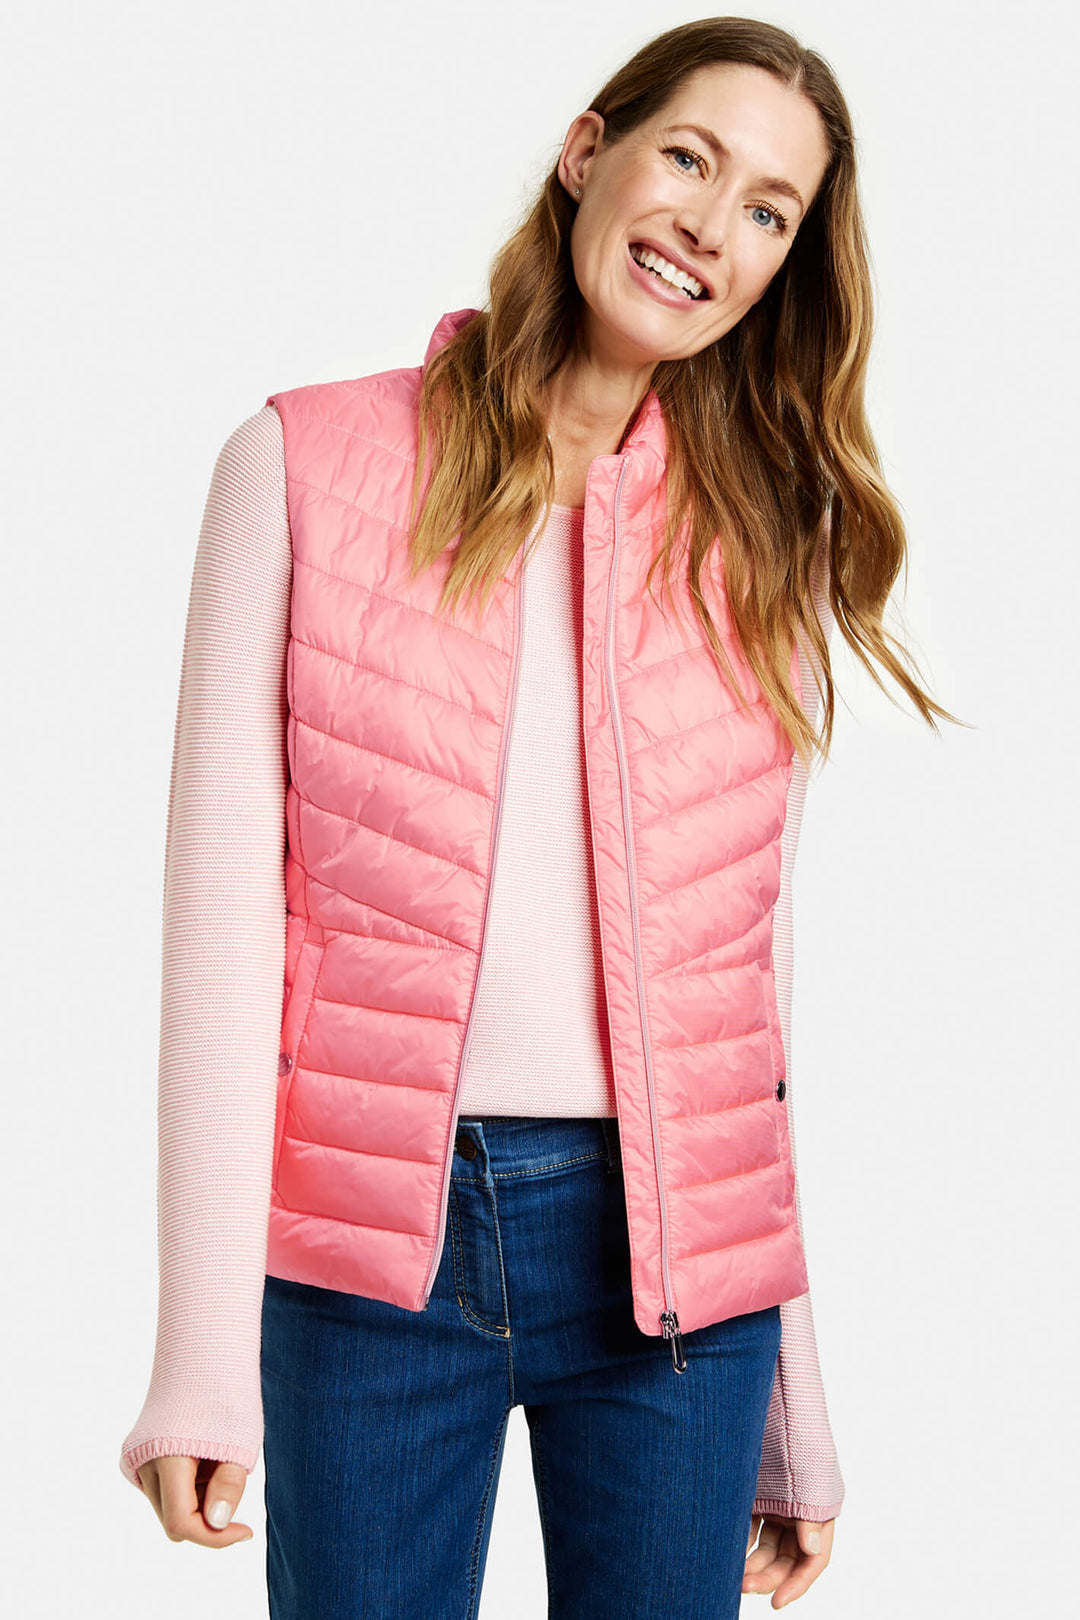 Gerry Weber 94110 Pink Candied Padded Gilet - Dotique